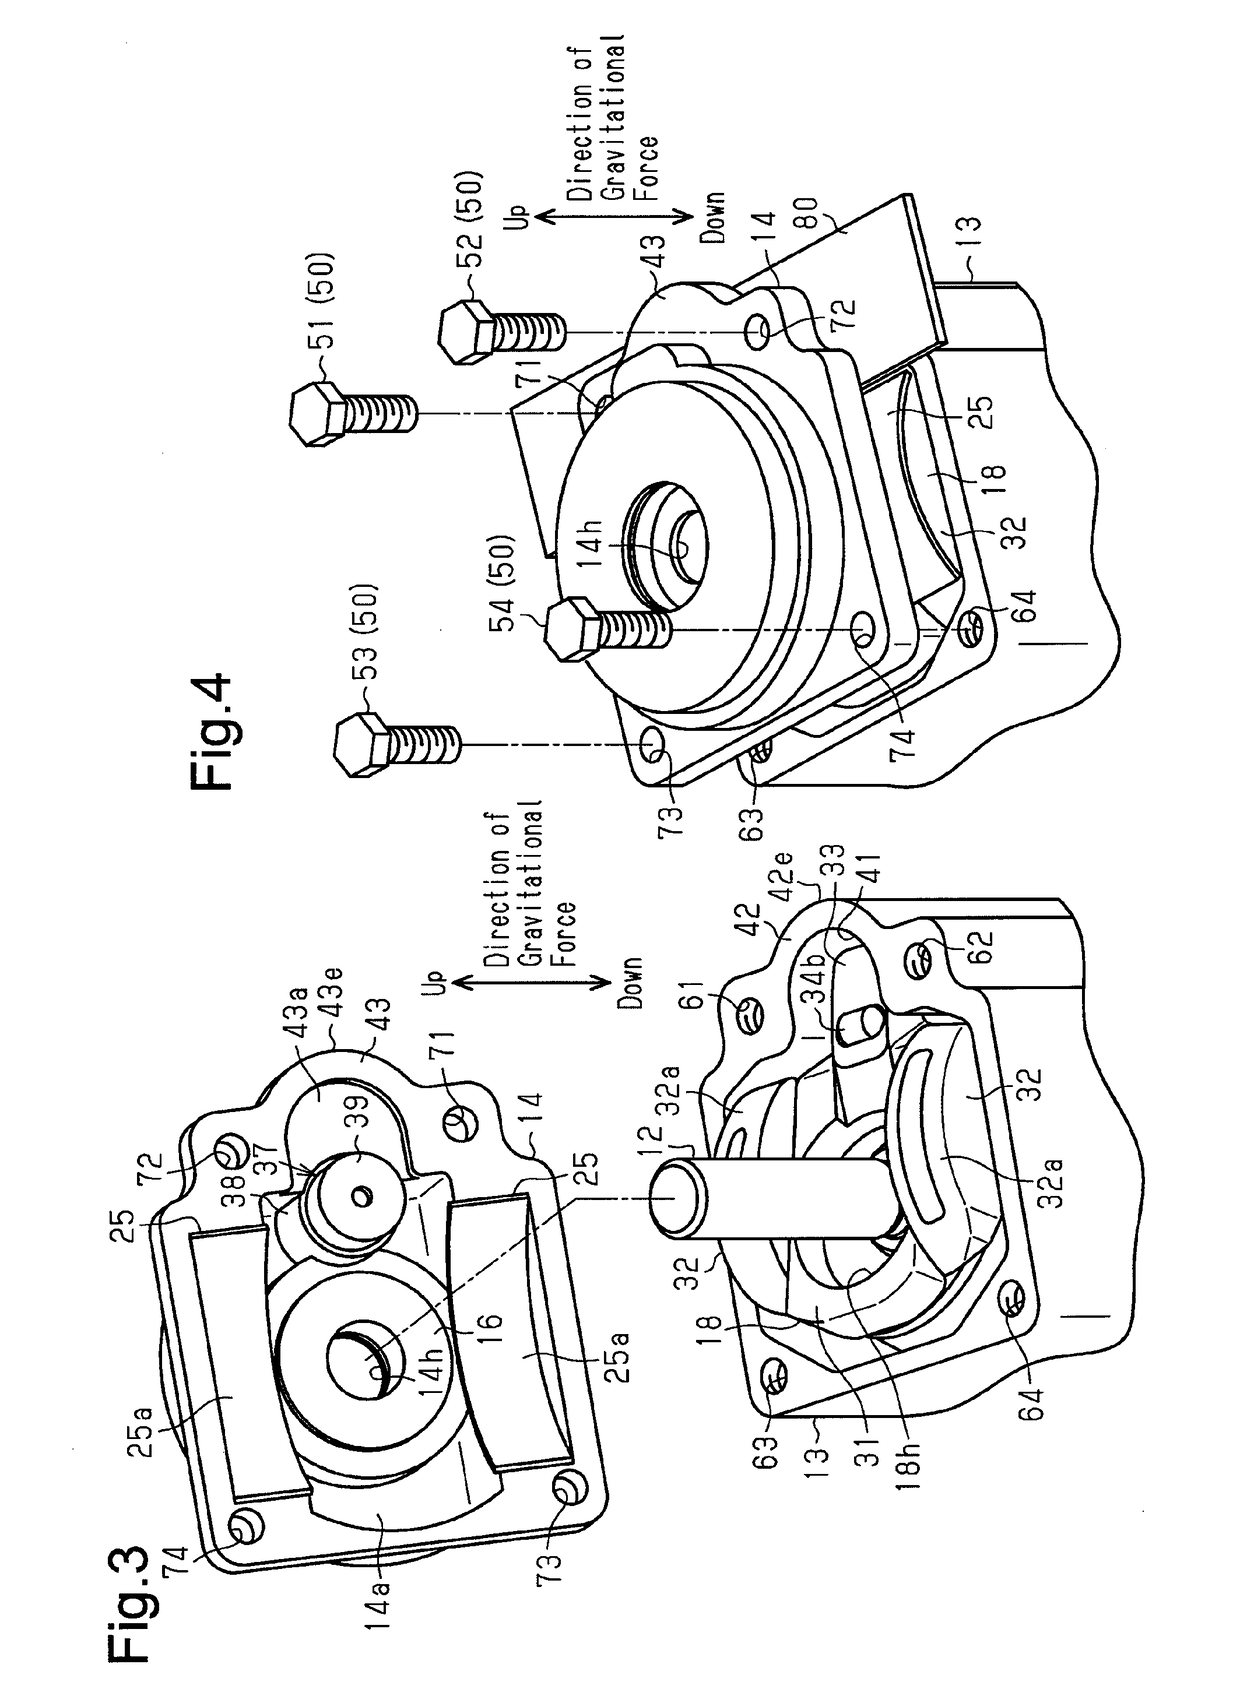 Variable displacement swash plate type piston pump